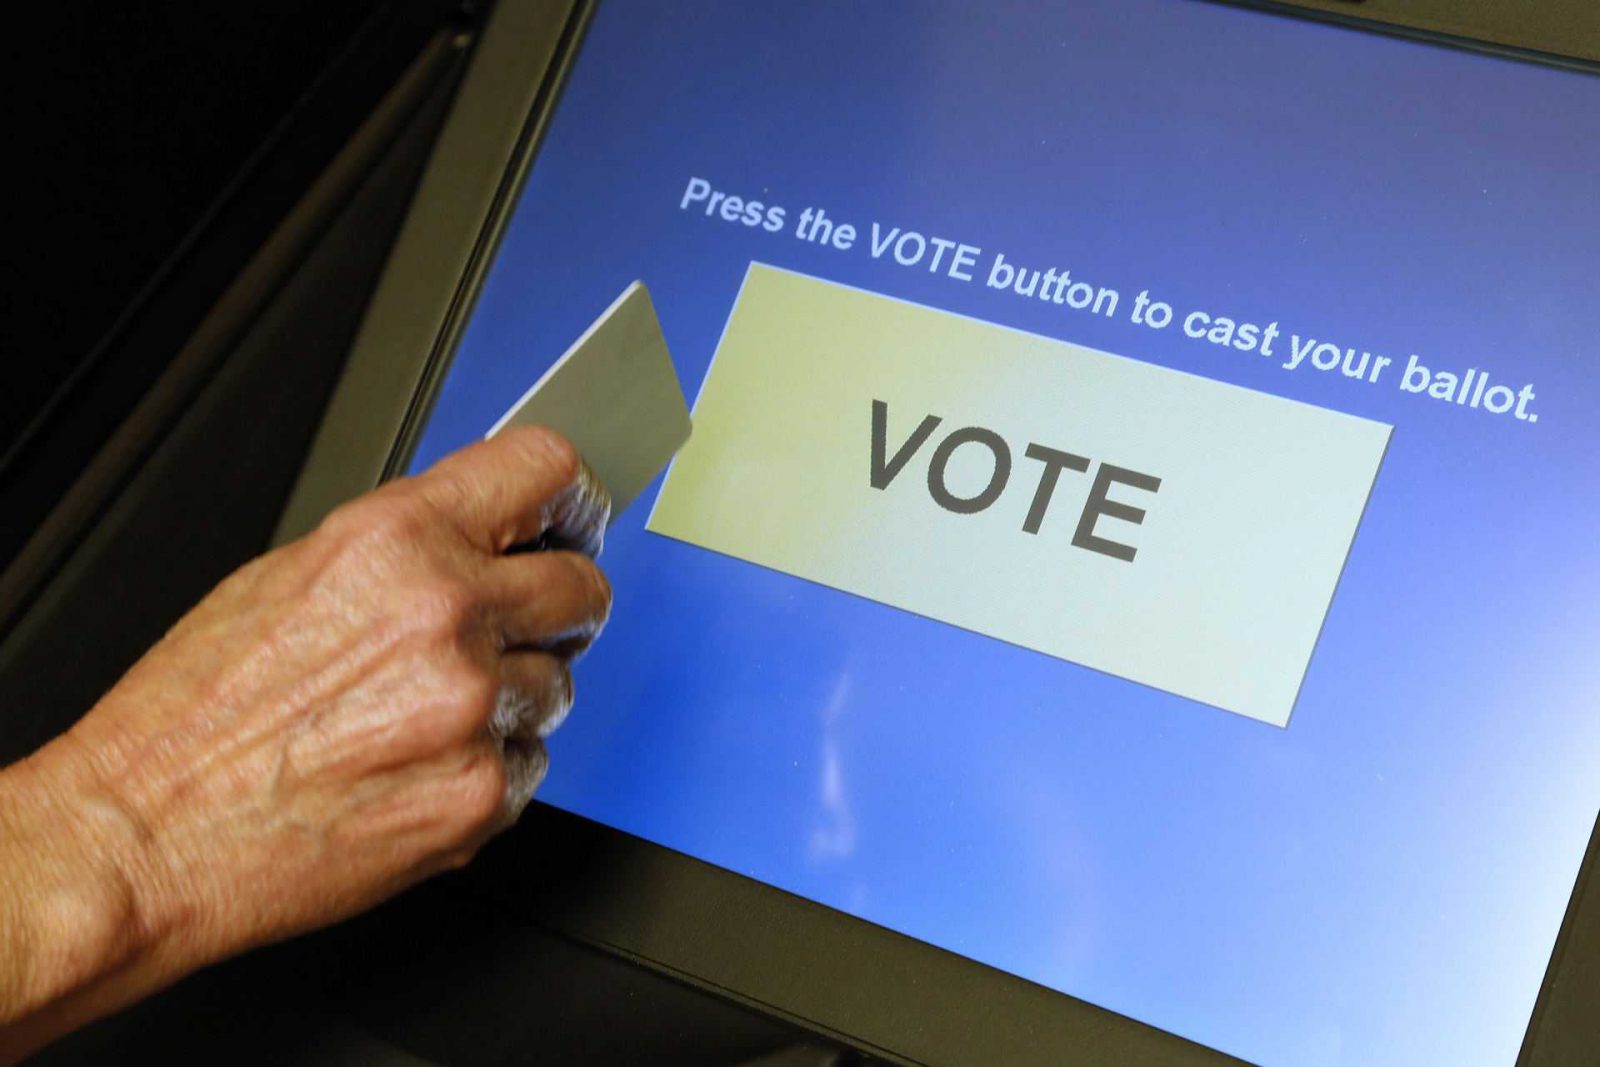 An elections official demonstrates a touch-screen voting machine at the Fairfax County Governmental Center in Fairfax, Virginia, U.S. on October 3, 2012. REUTERS/Jonathan Ernst/File Photo